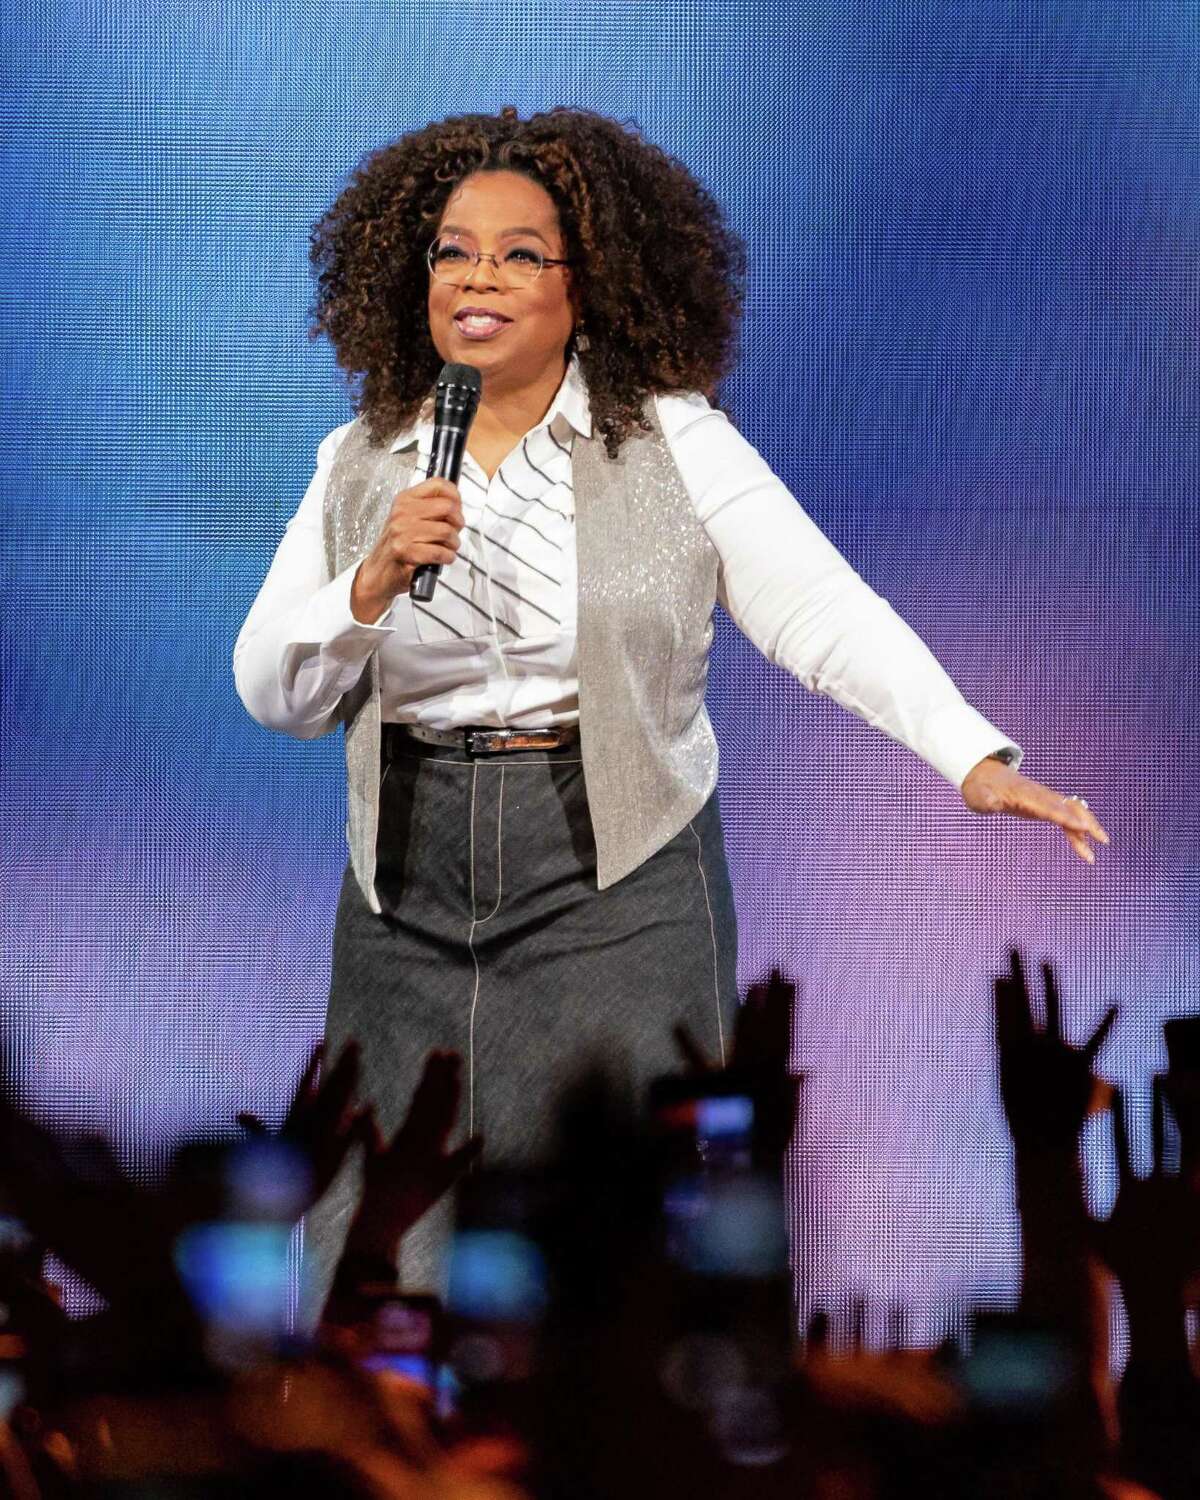 Oprah Winfrey speaks on stage during Oprah's 2020 Vision: Your Life in Focus Tour presented by WW (Weight Watchers Reimagined) at American Airlines Center on February 15, 2020 in Dallas, Texas. (Photo by SUZANNE CORDEIRO / AFP)